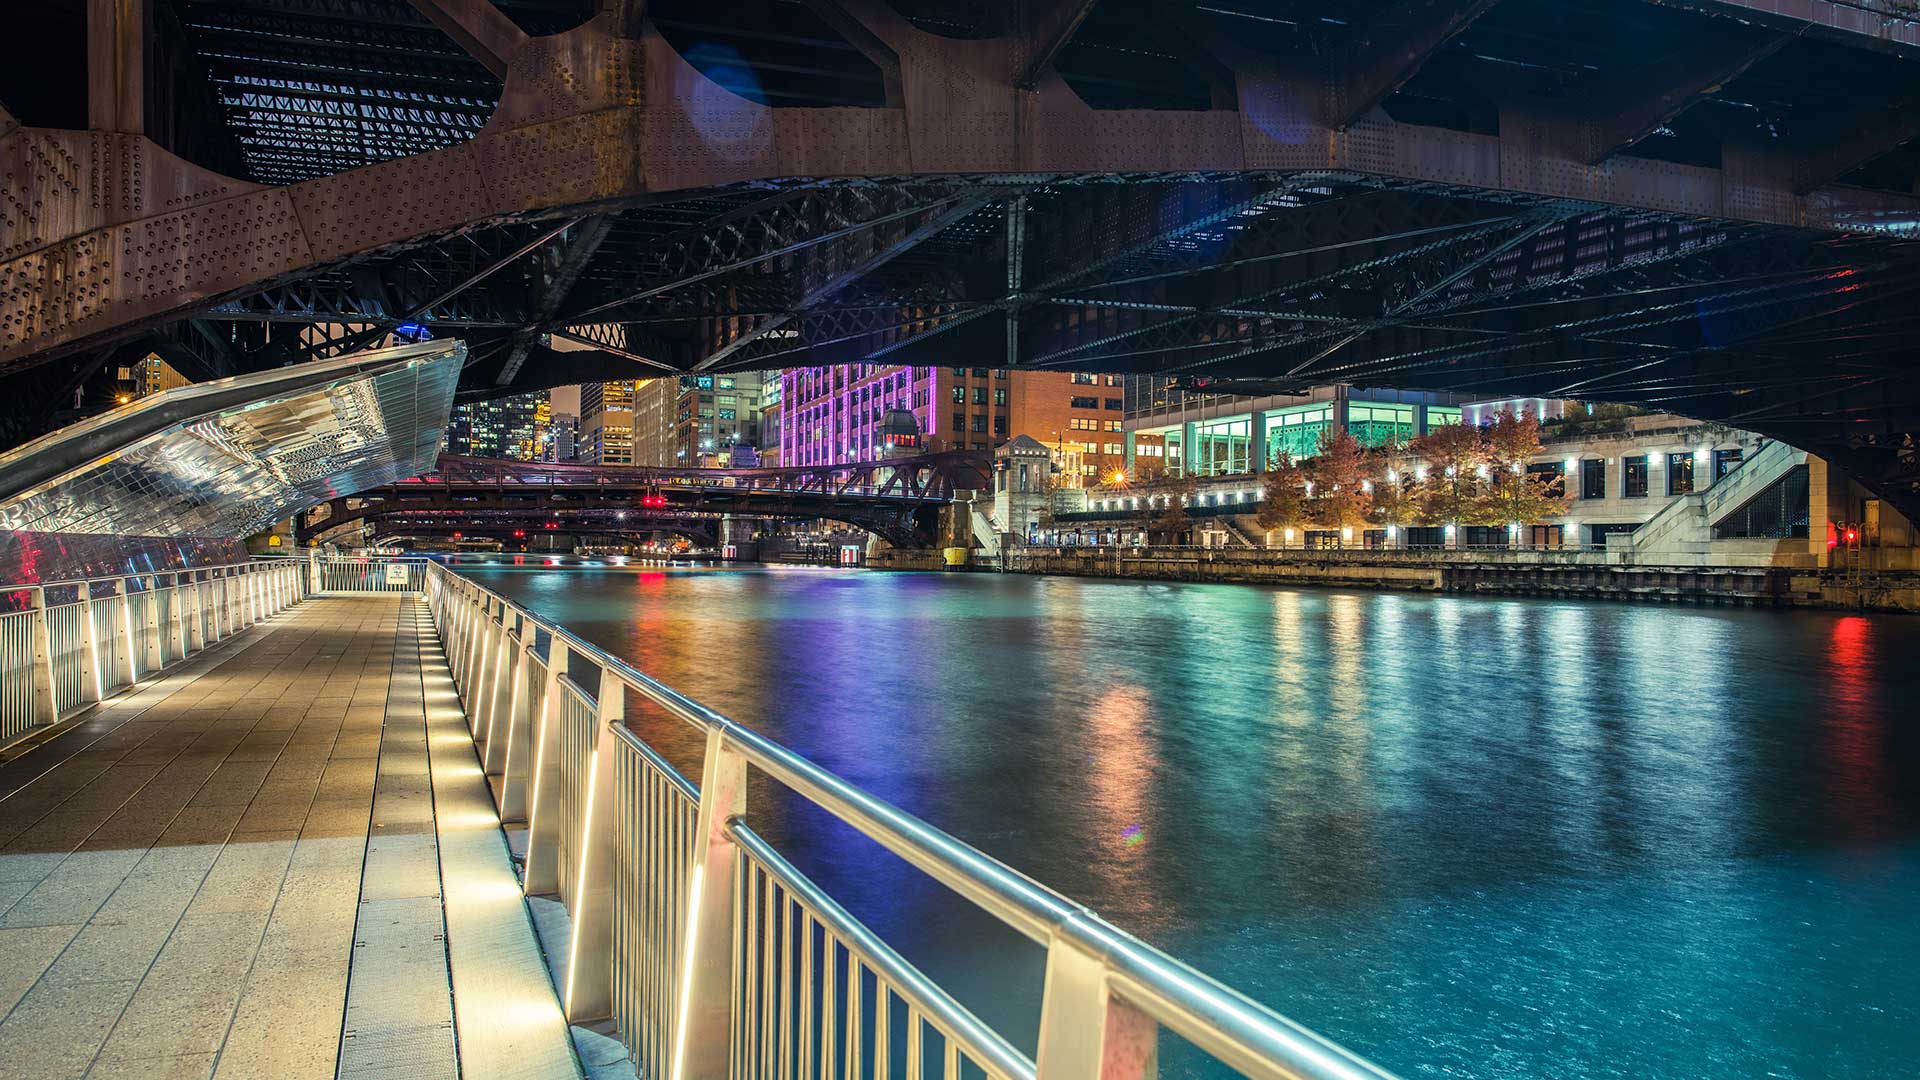 Looking along a pedestrian walkway under a Chicago Bridge at night along the riverfront. The walkway is on the left and the Chicago River on the right. The buildings seen on the other side of river are lit up with many different colors.